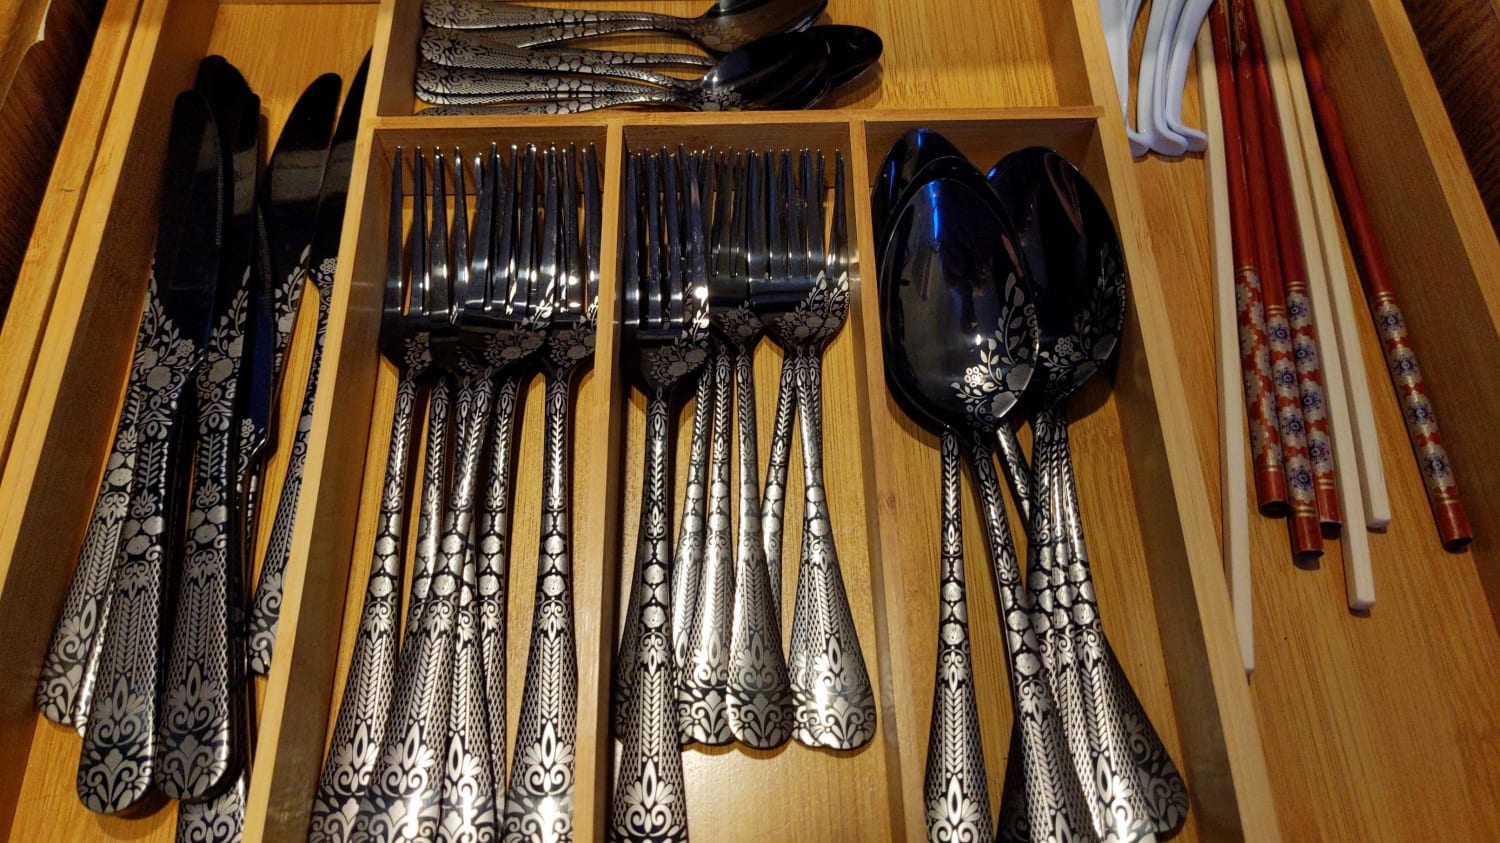 My first set of matching silverware